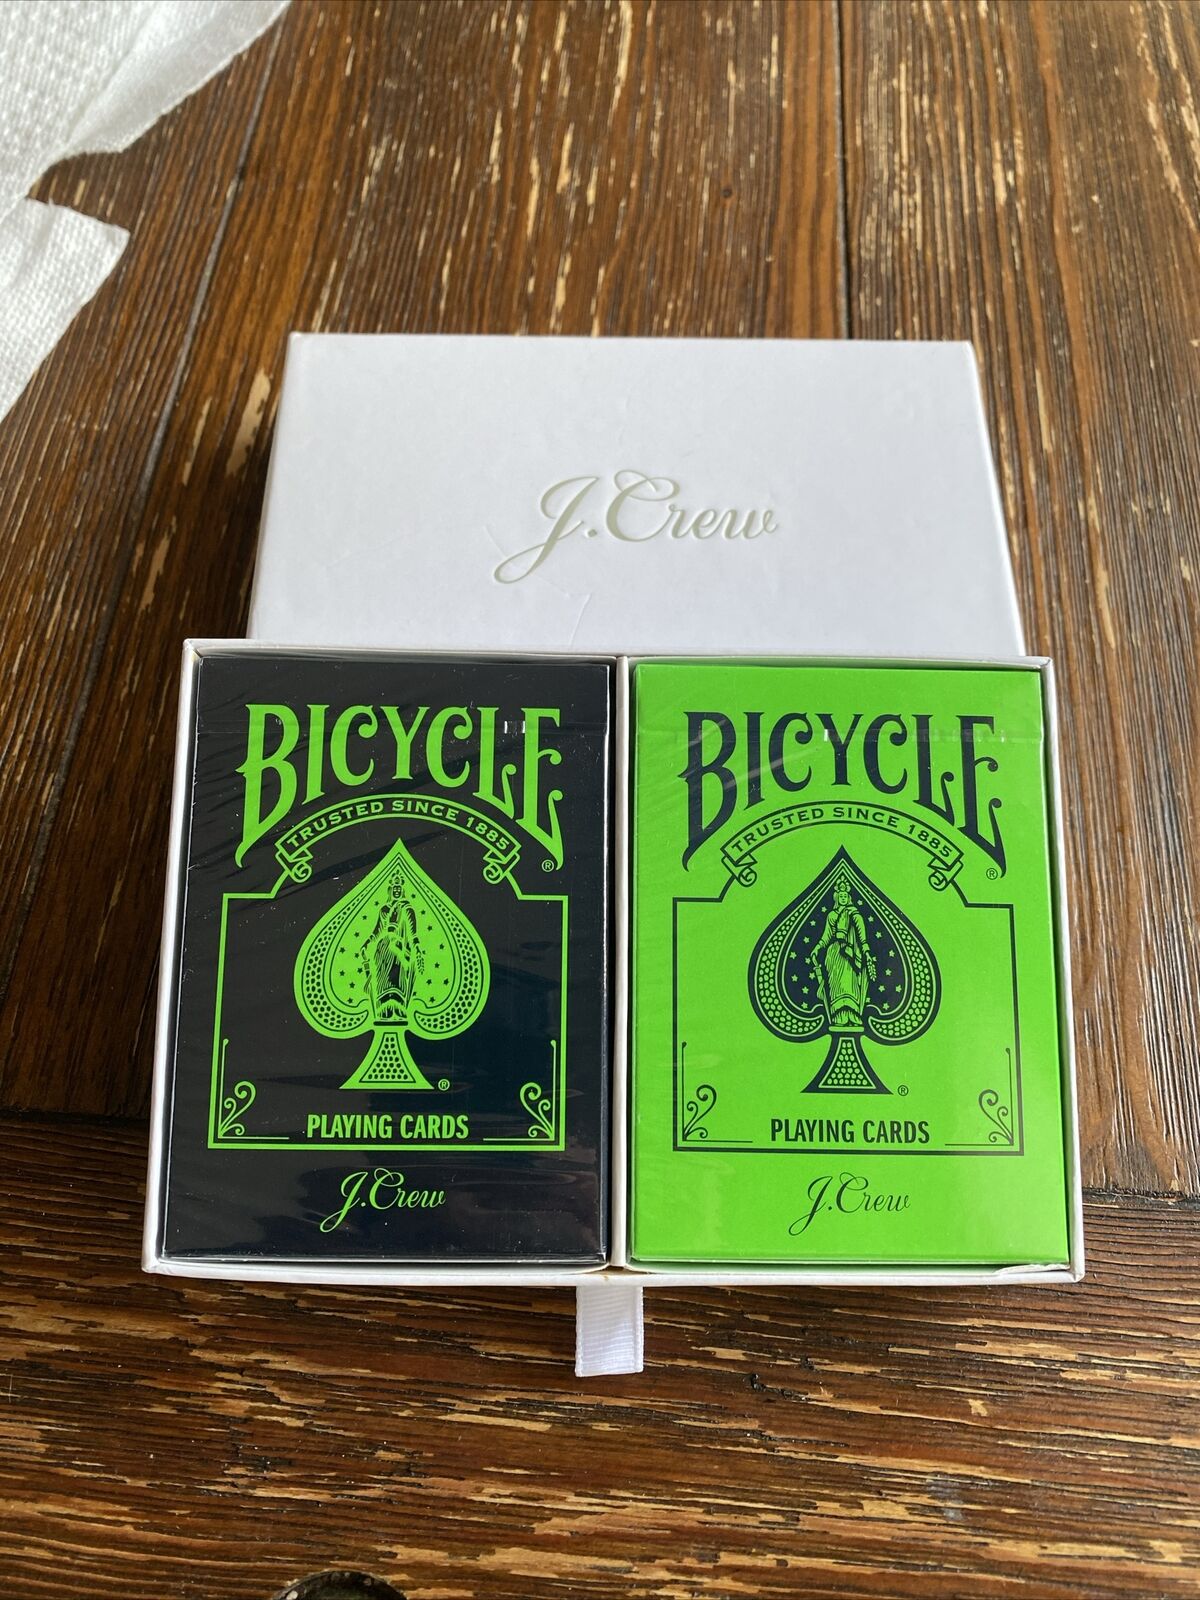 J. Crew Bicycle Playing Cards In Box Limited Promo SEALED Rare VIP Black Green